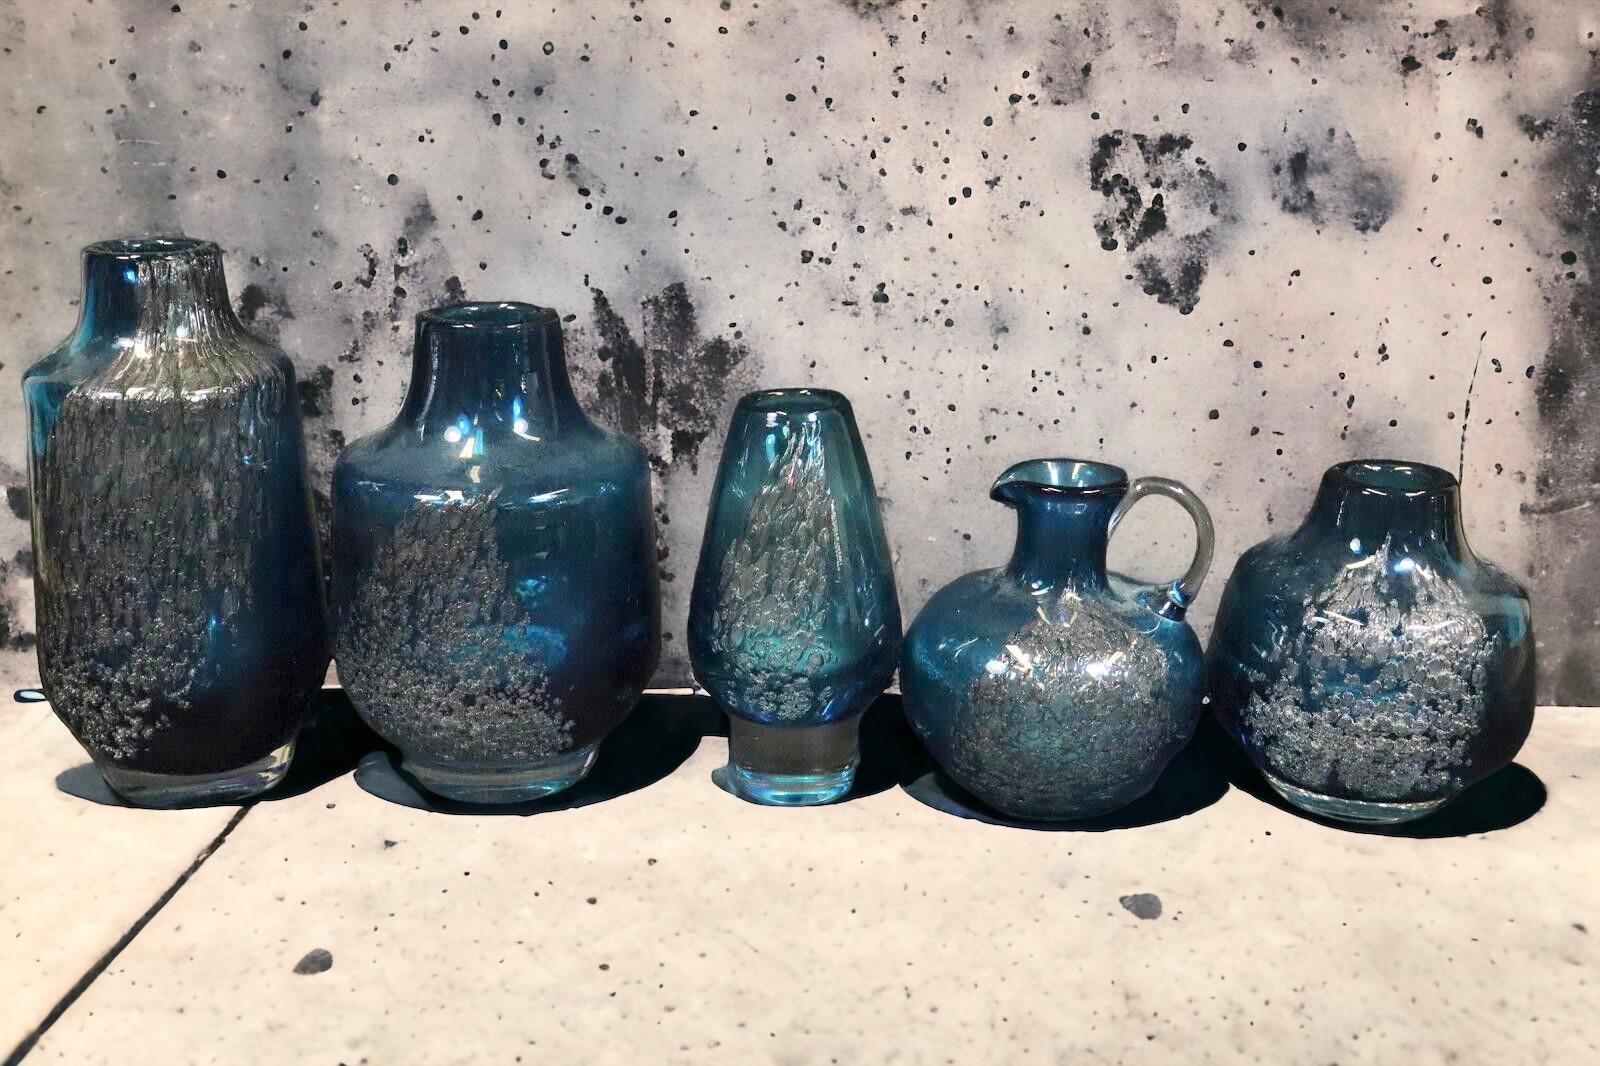 Set of 5 beautiful hand blown german art glass vases. Designed by Heinrich Loffelhardt for Zwiesel Glass in the Bavarian Forest. Clear, blue and silver swirl glass with lots of small bubbles inside. A beautiful piece of art for any room. Marked at a